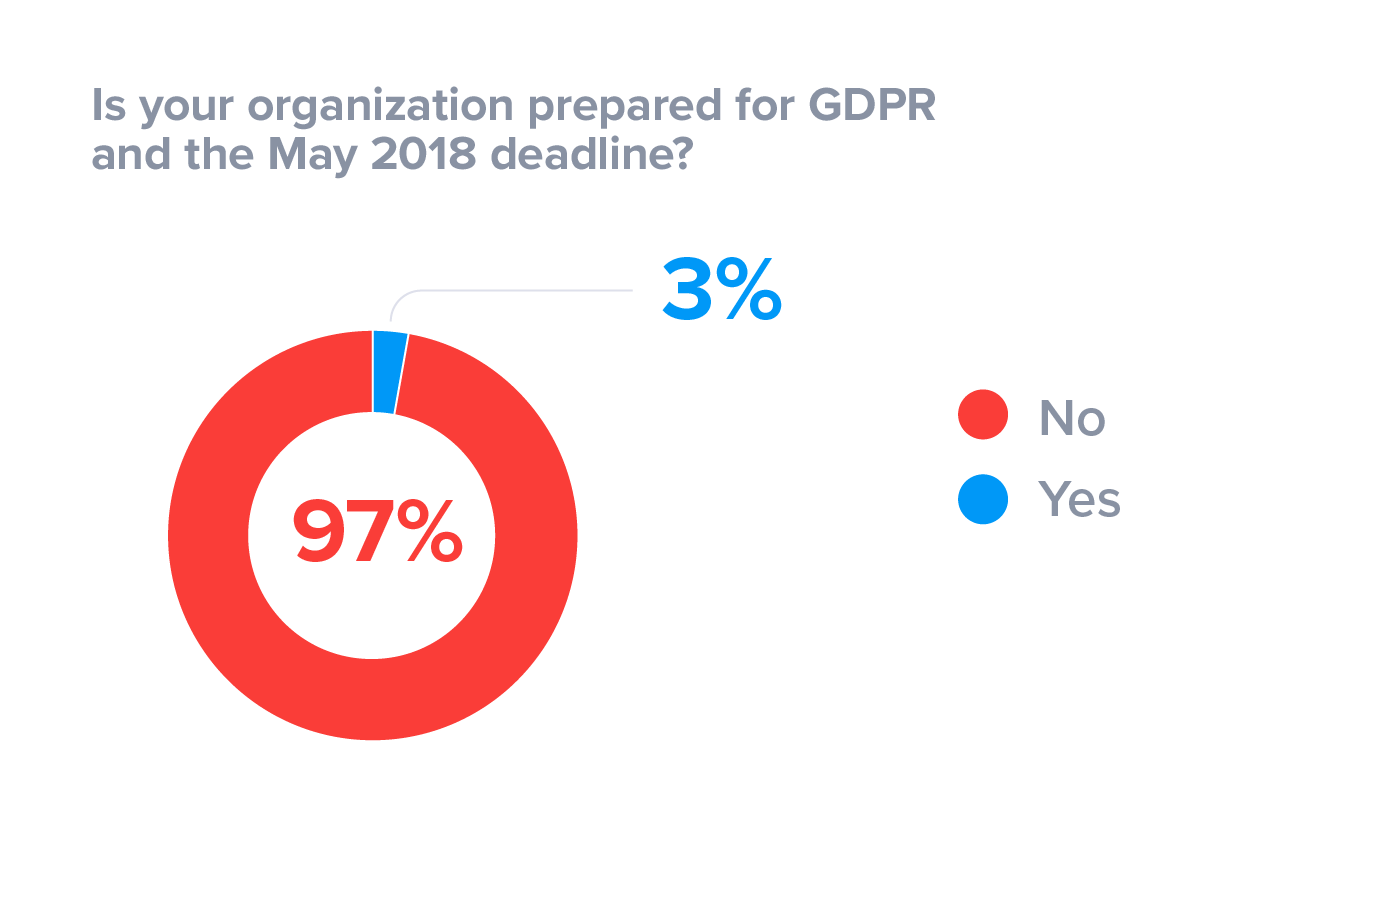 Is your organization prepared for GDPR and the May 2018 deadline?